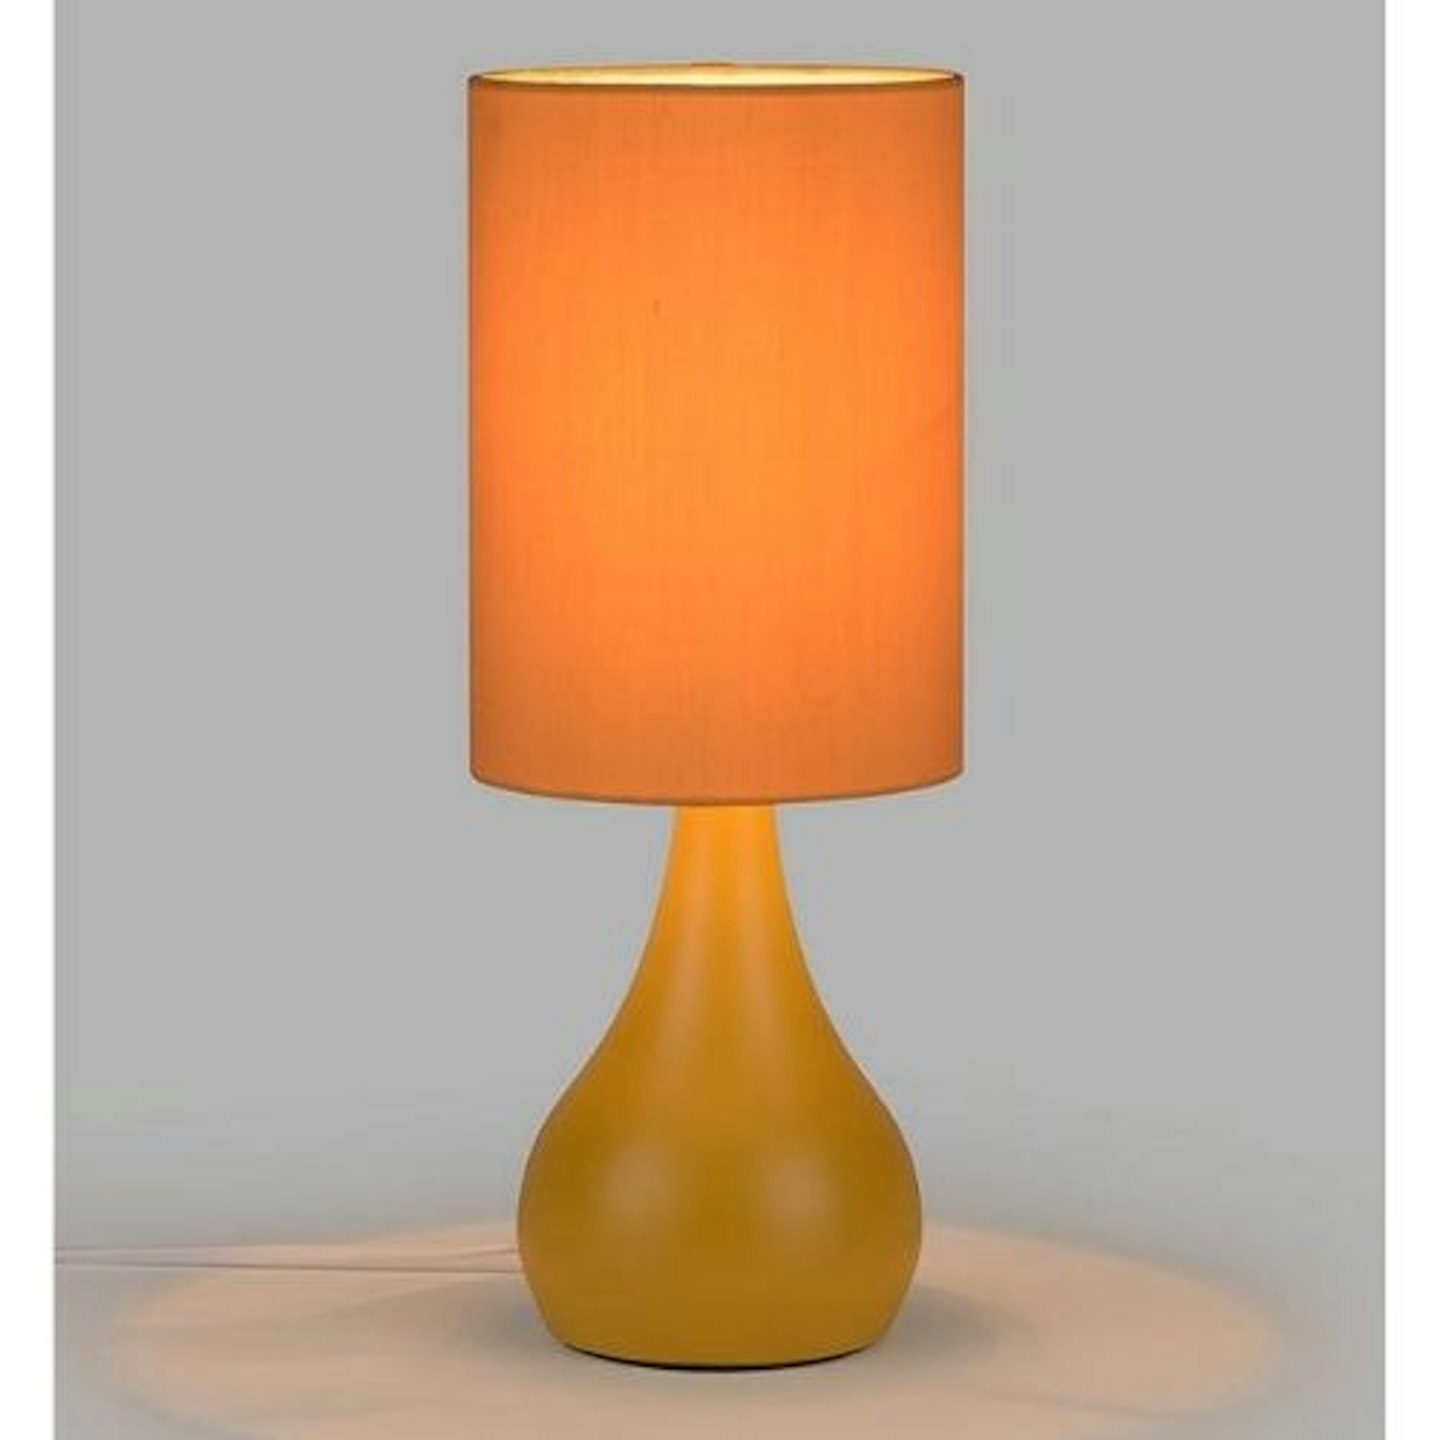 ANYDAY John Lewis & Partners Kristy Touch Table Lamp